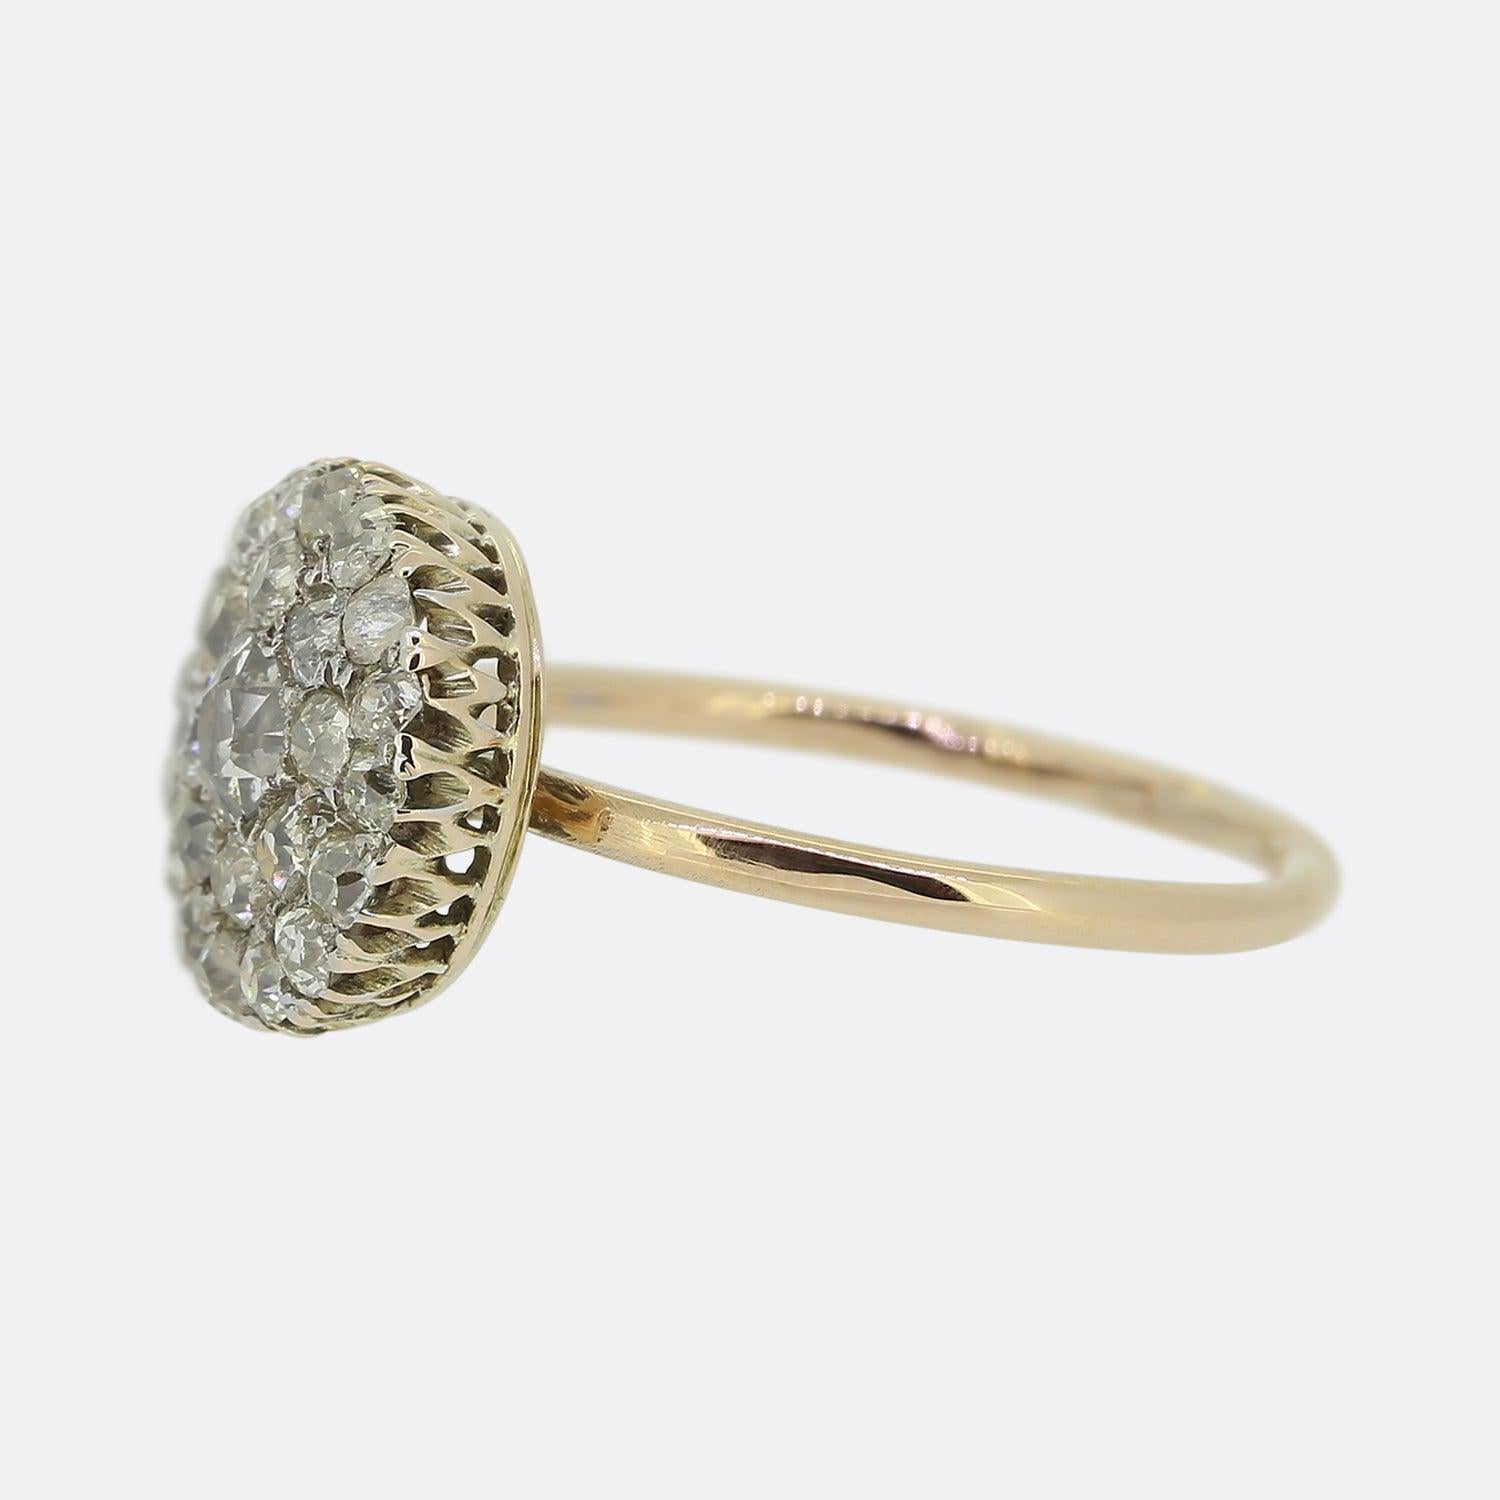 Here we have a beautiful diamond cluster ring from the Edwardian era. At the centre of the piece we find a single sizeable old cut diamond which is surrounded by two rows of smaller matching stones; all of which are set in platinum and sit atop a